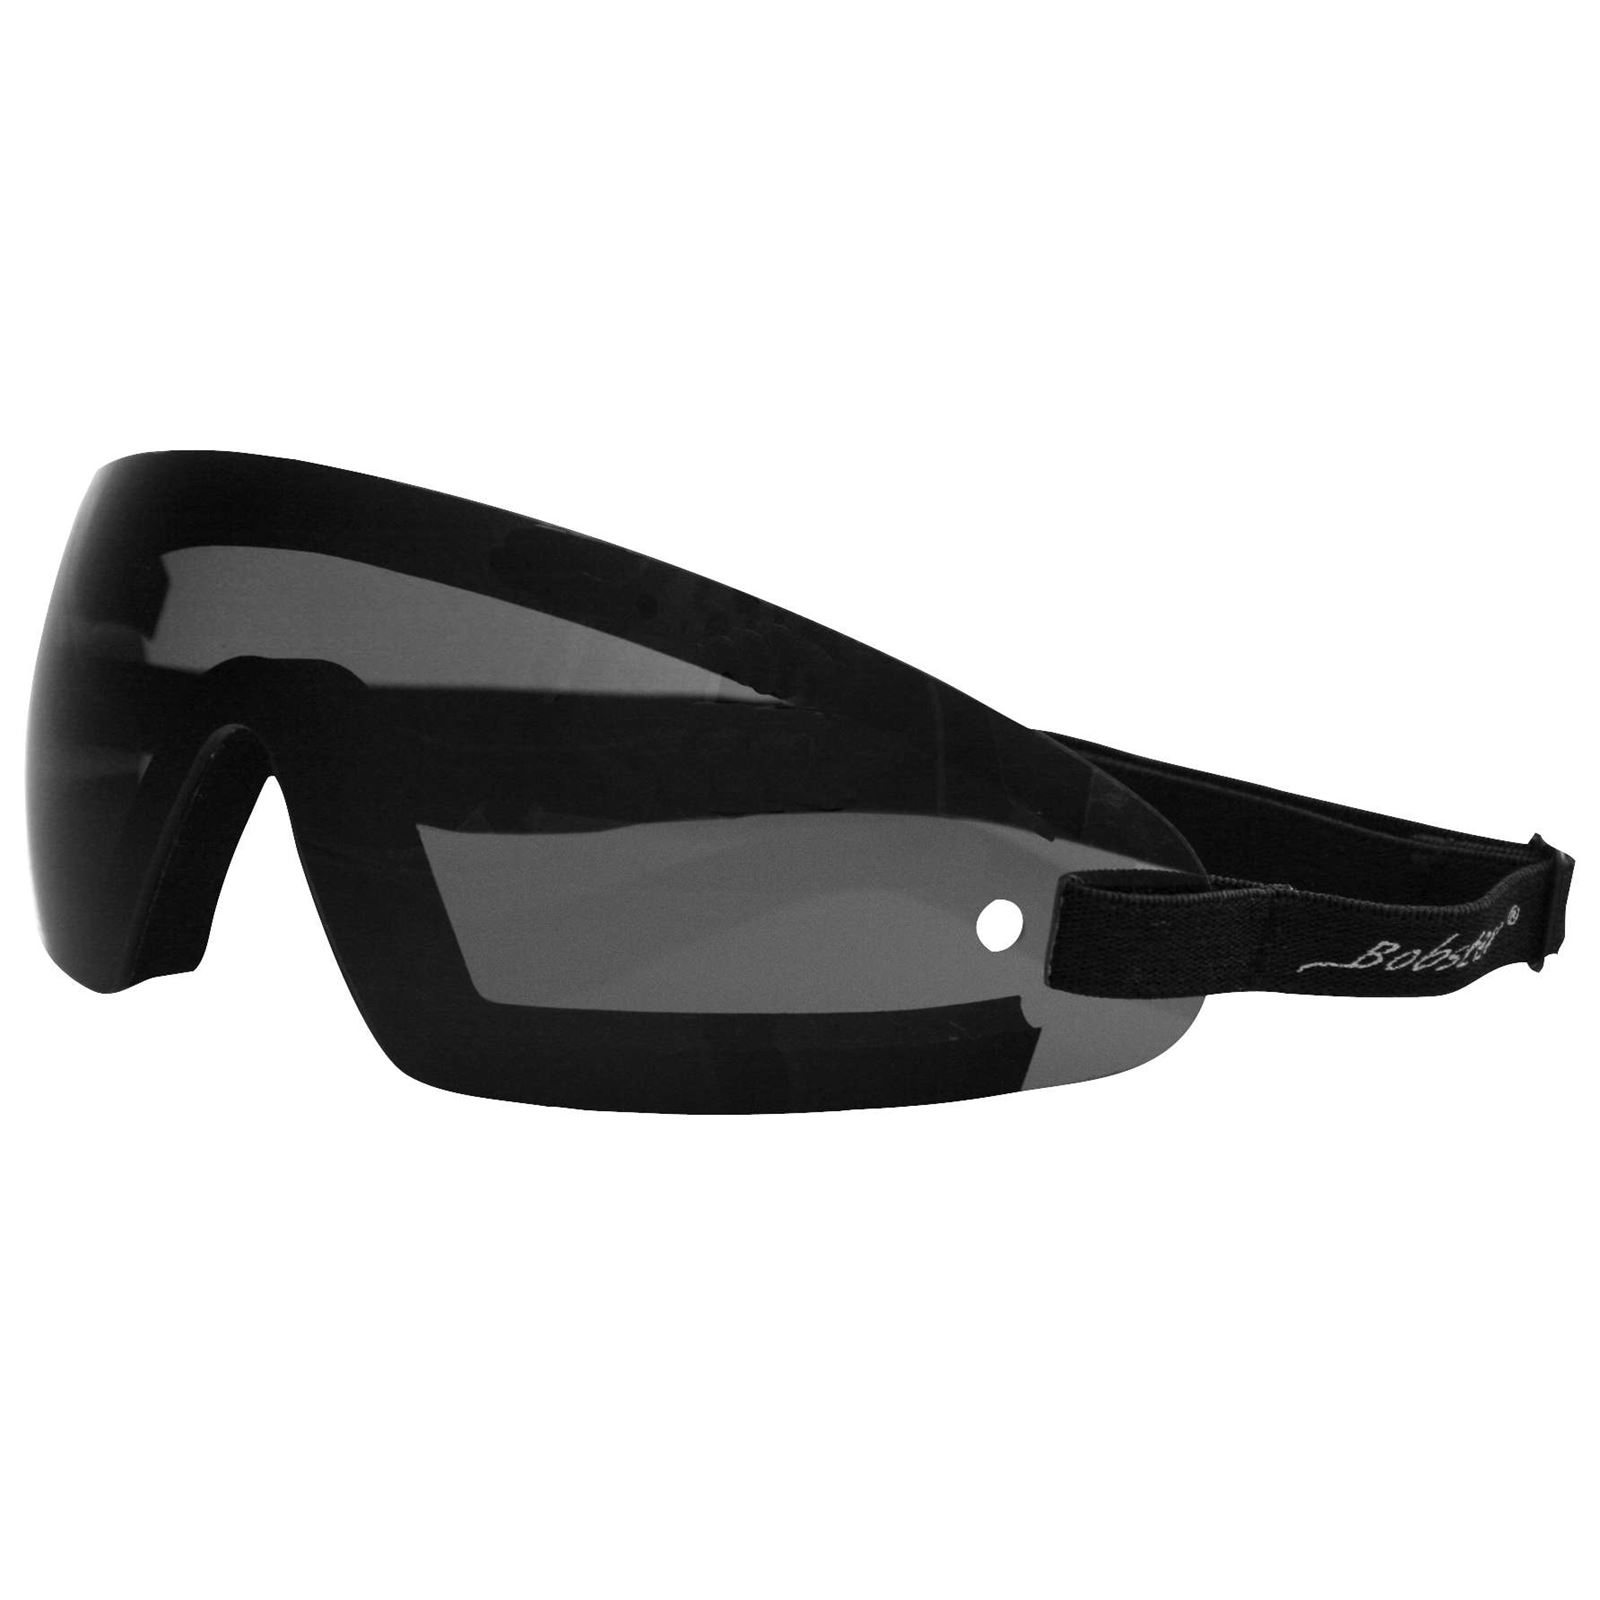 Bobster Wrap Around Goggles